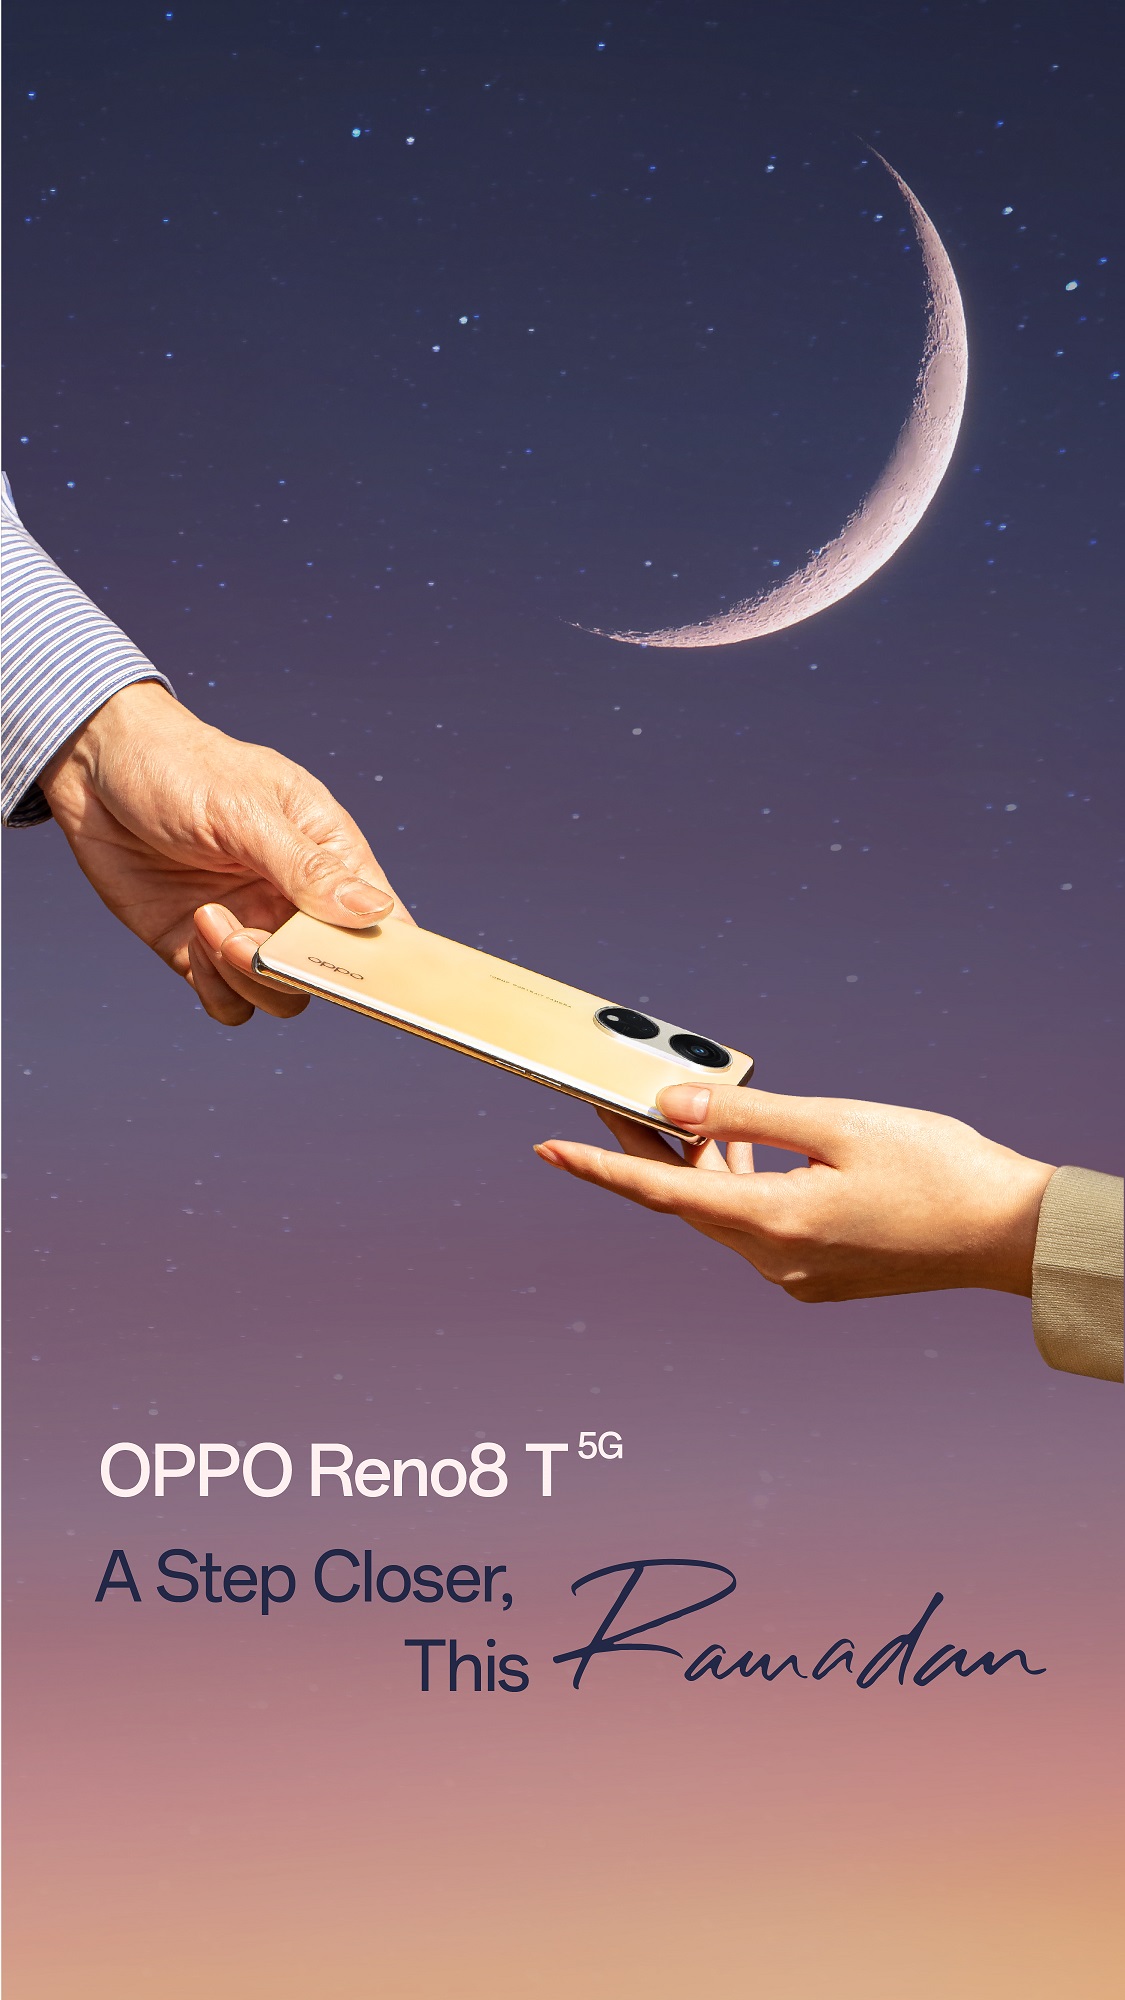 Discover-a-New-Perspective-this-Ramadan-with-the-OPPO-Reno8-T